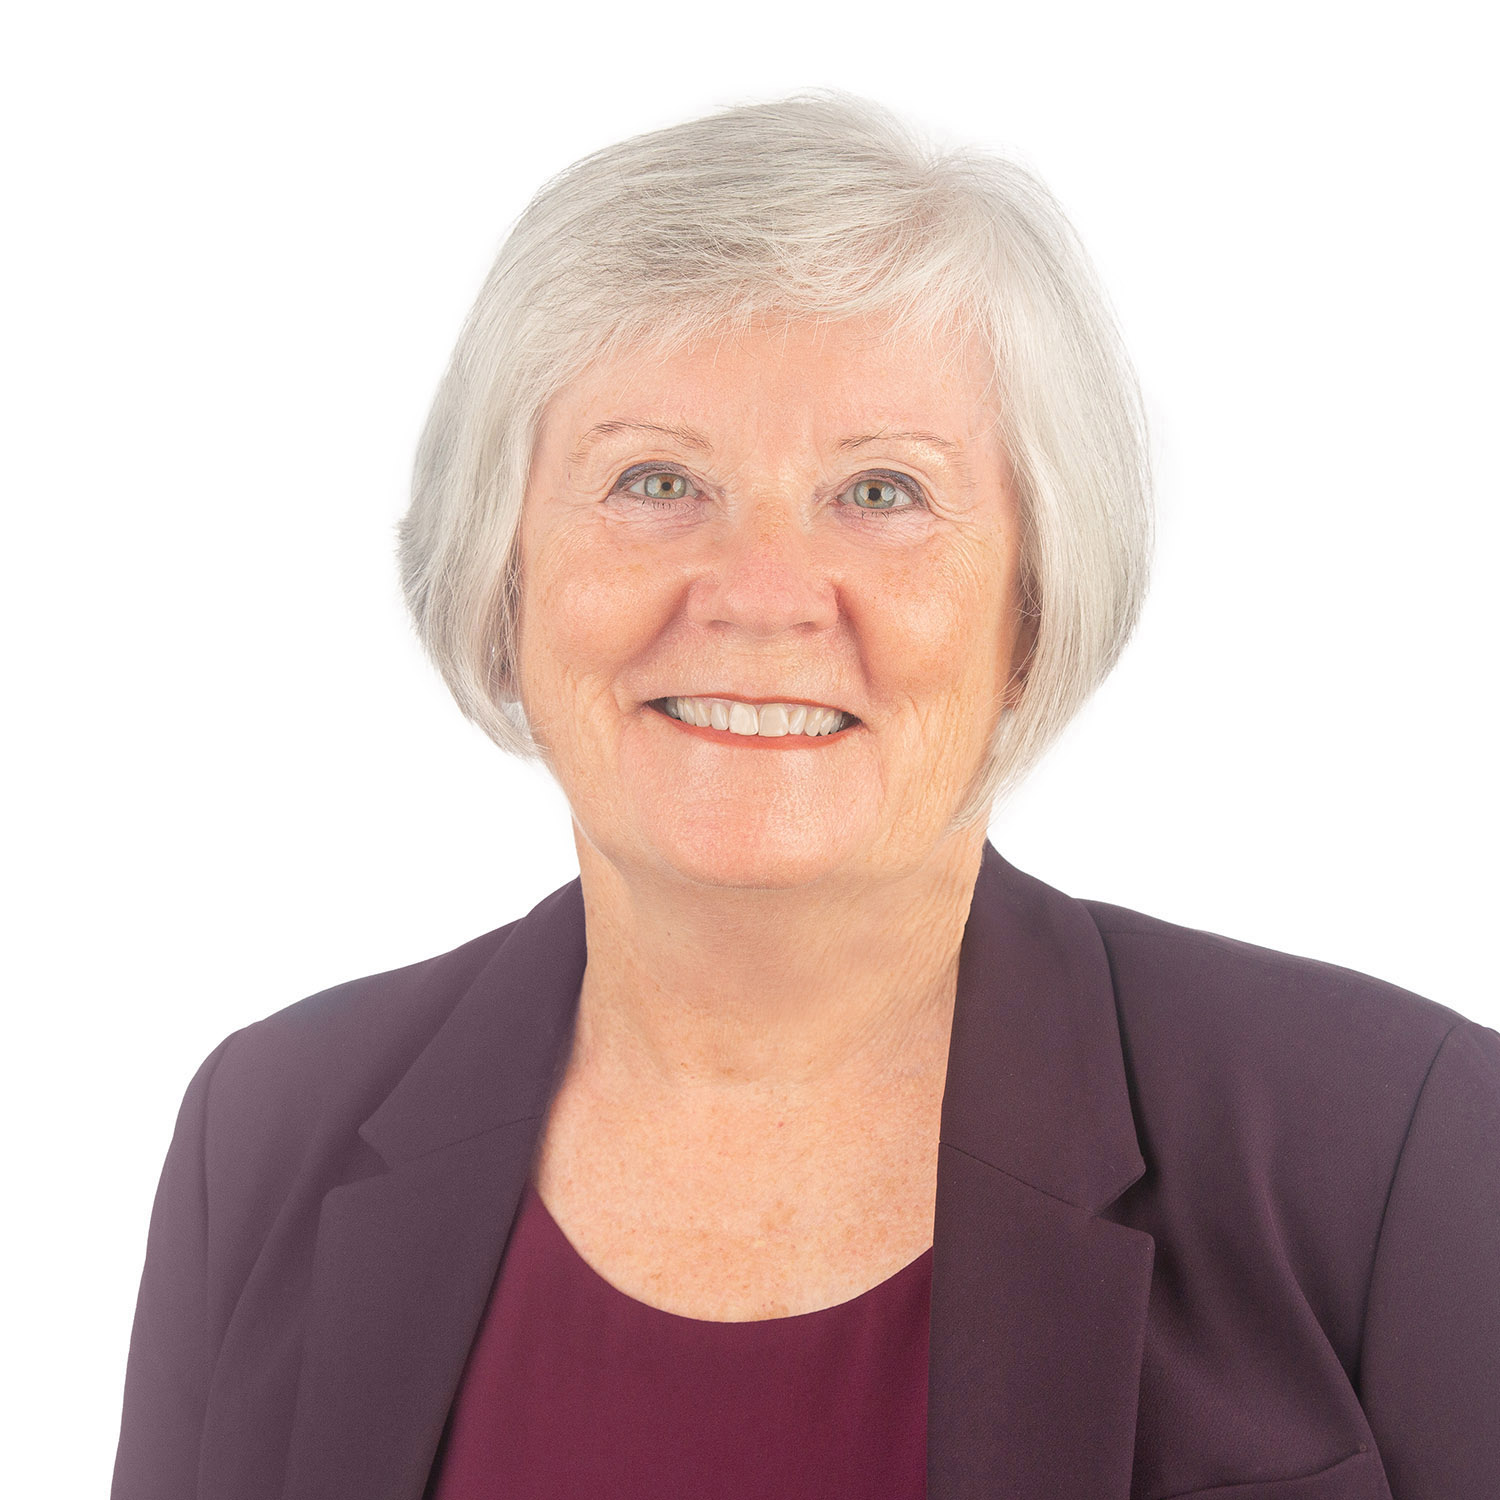 Joanne Drumm is running for Whitby Council